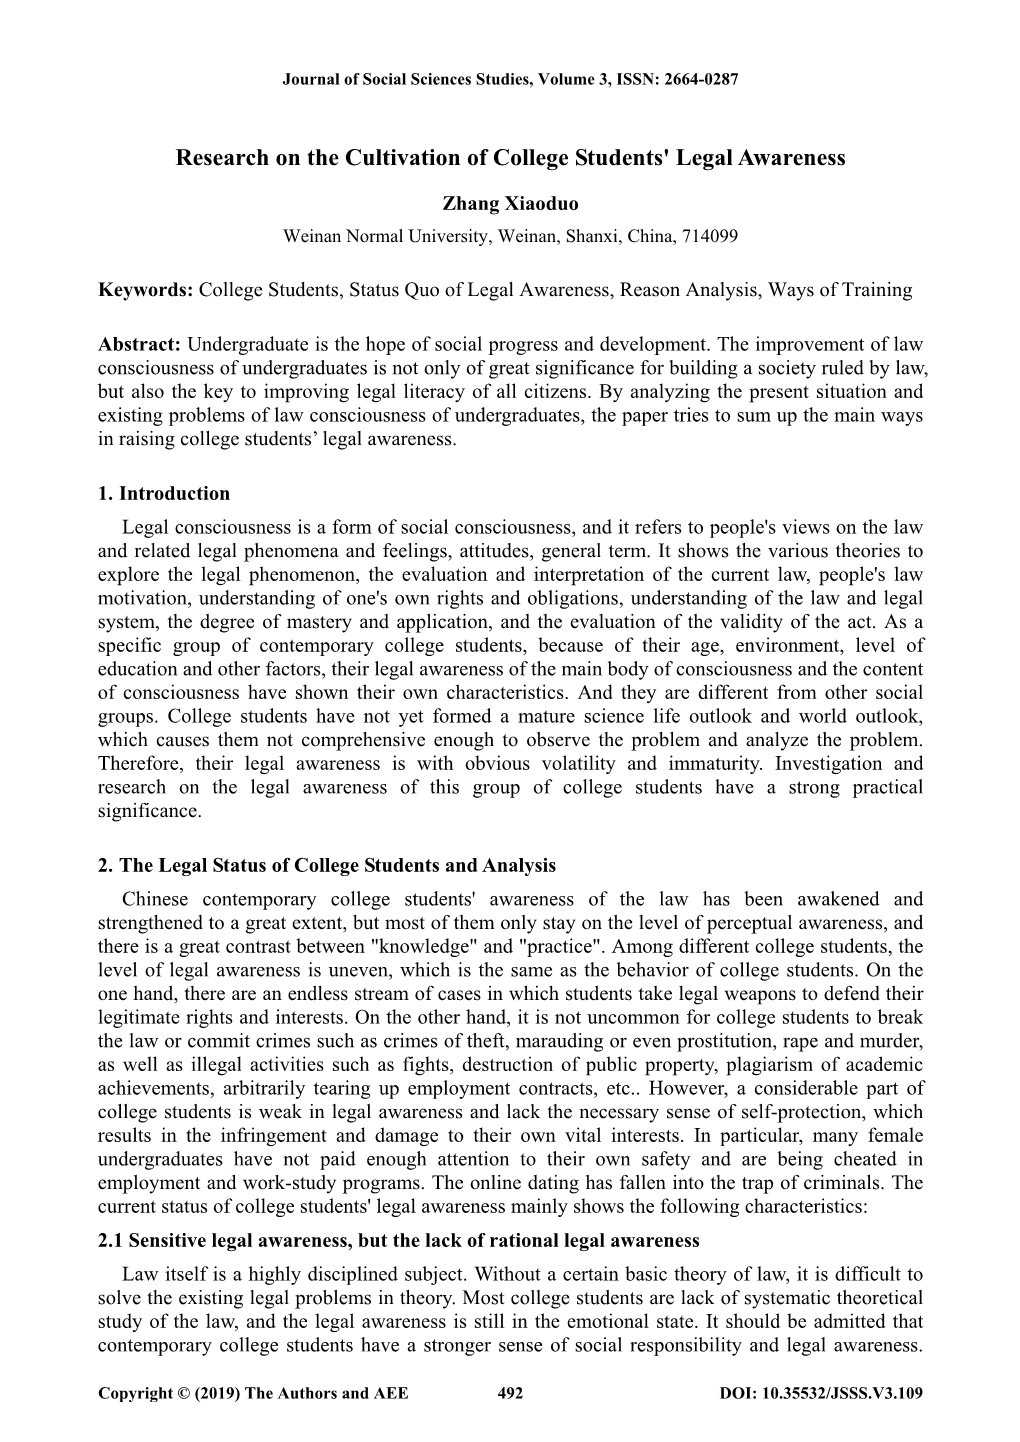 Research on the Cultivation of College Students' Legal Awareness